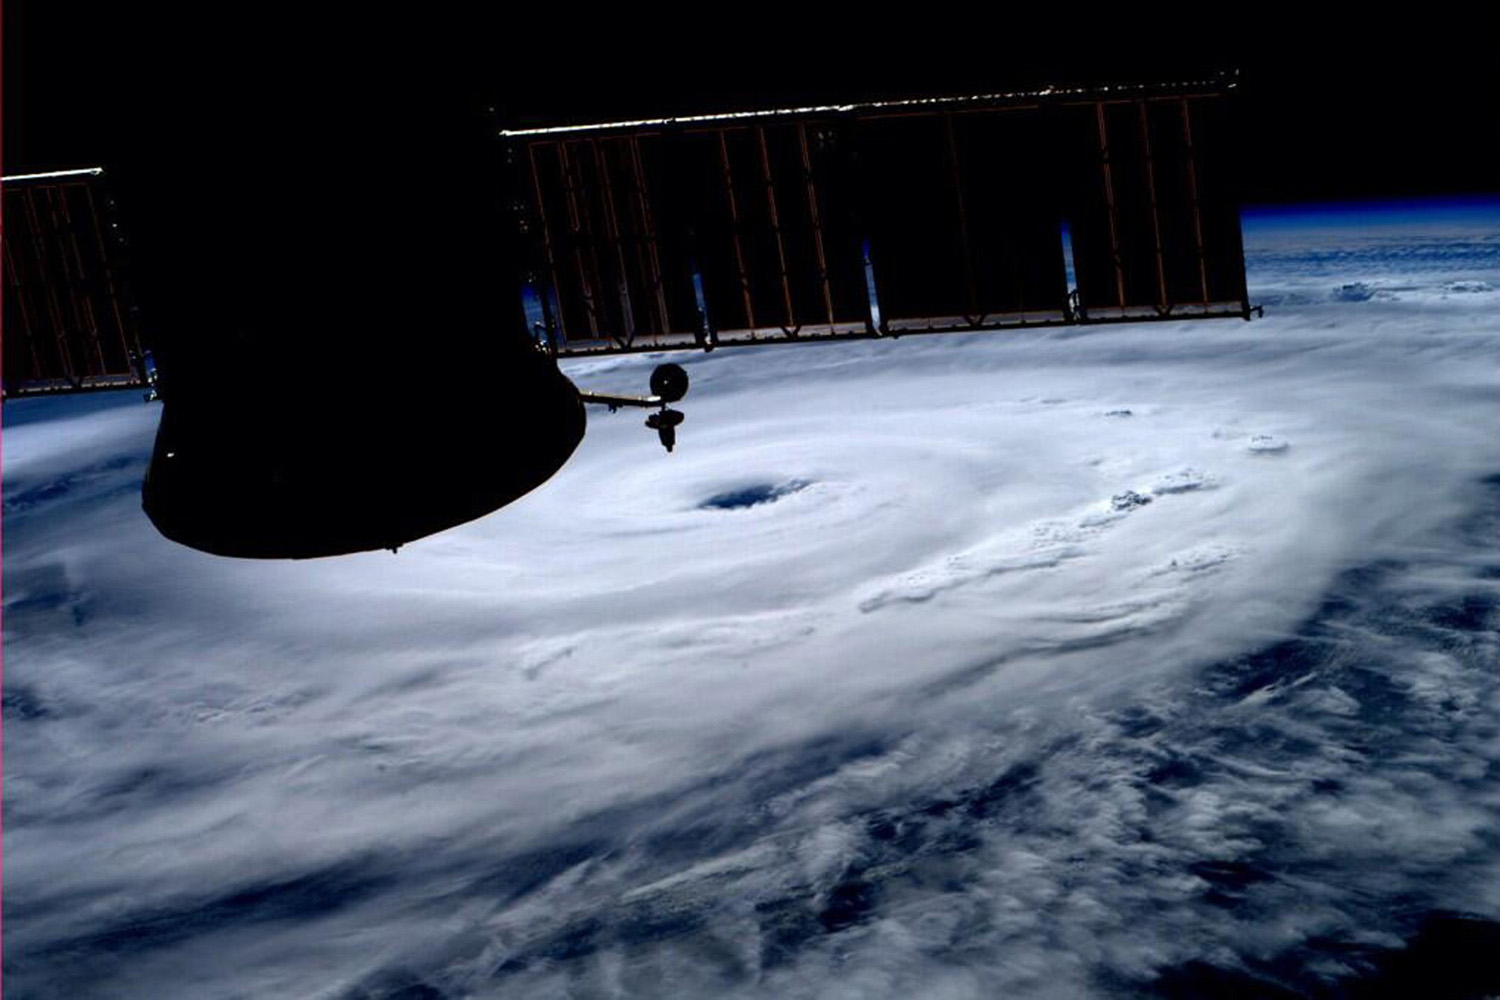 The eye of Hurricane Arthur is seen in this photo from the International Space Station tweeted by astronaut Alexander Gerst